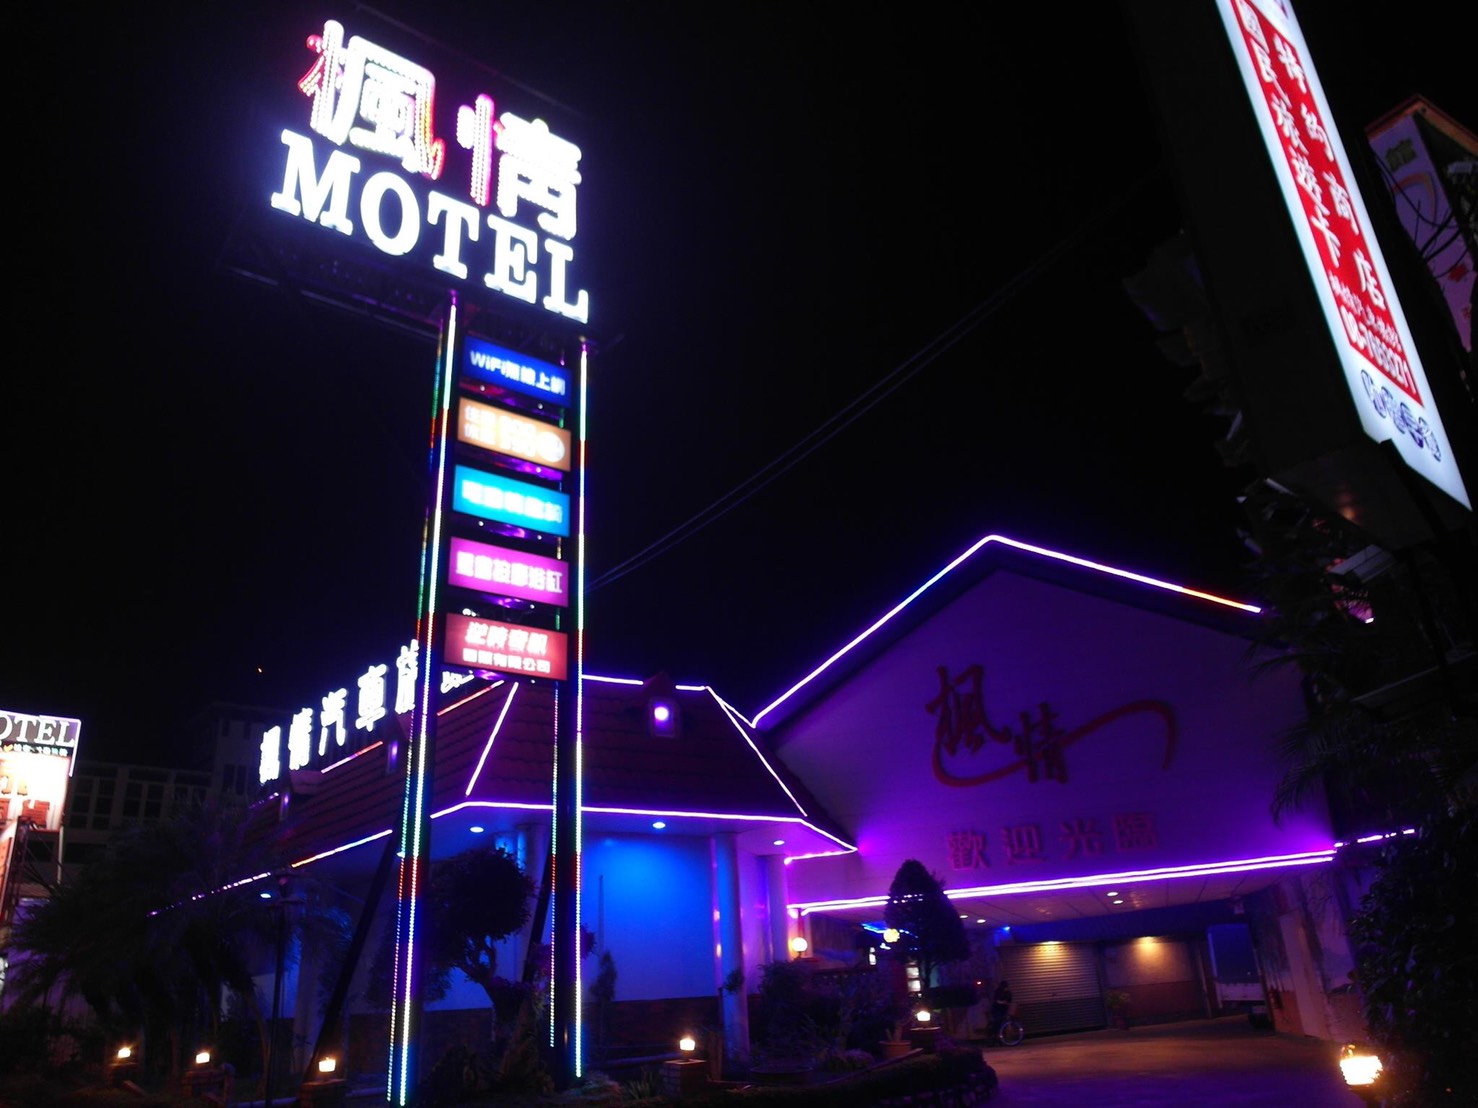 Maple Love Motel:2 photos in total